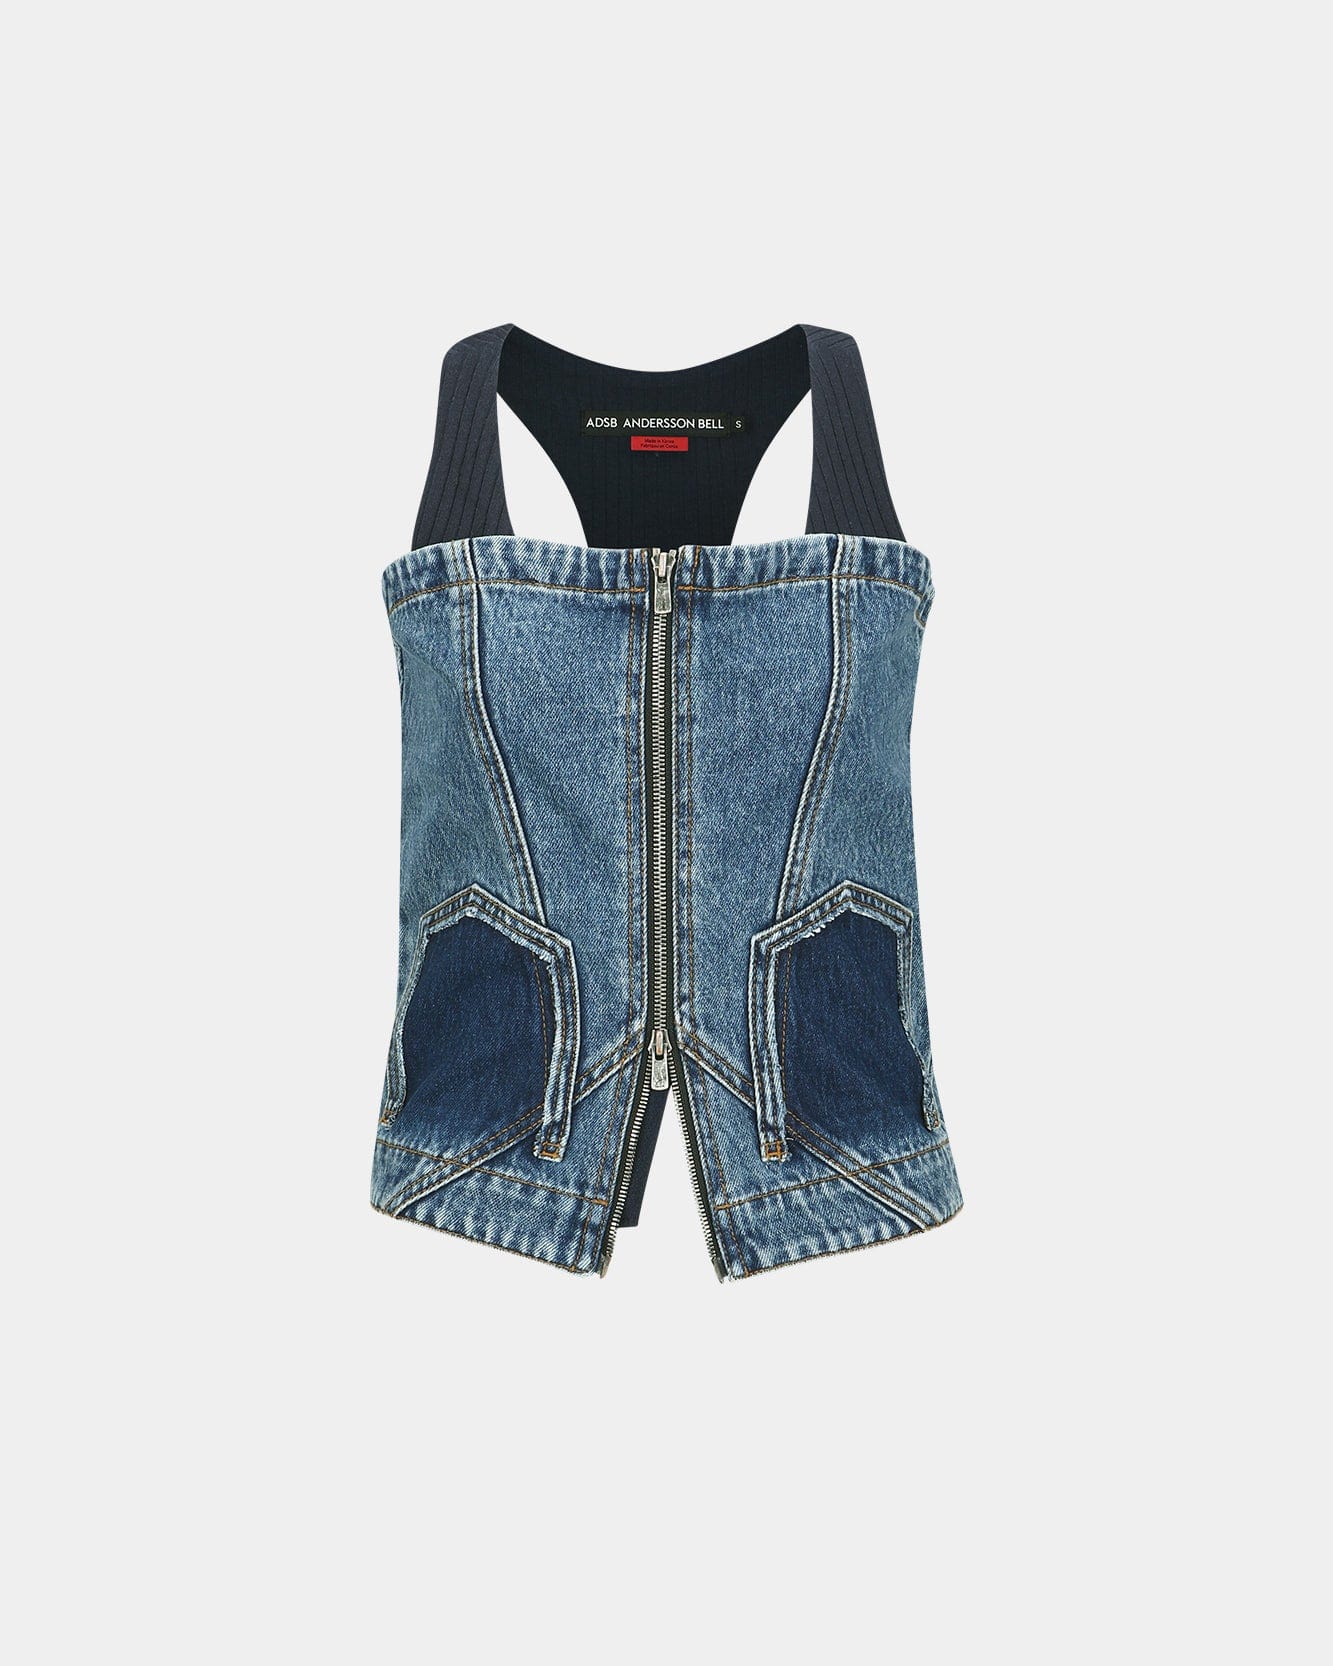 Andersson Bell (WOMEN) COVE DECONSTRUCTED DENIM BUSTIER atb1101w(BLUE)